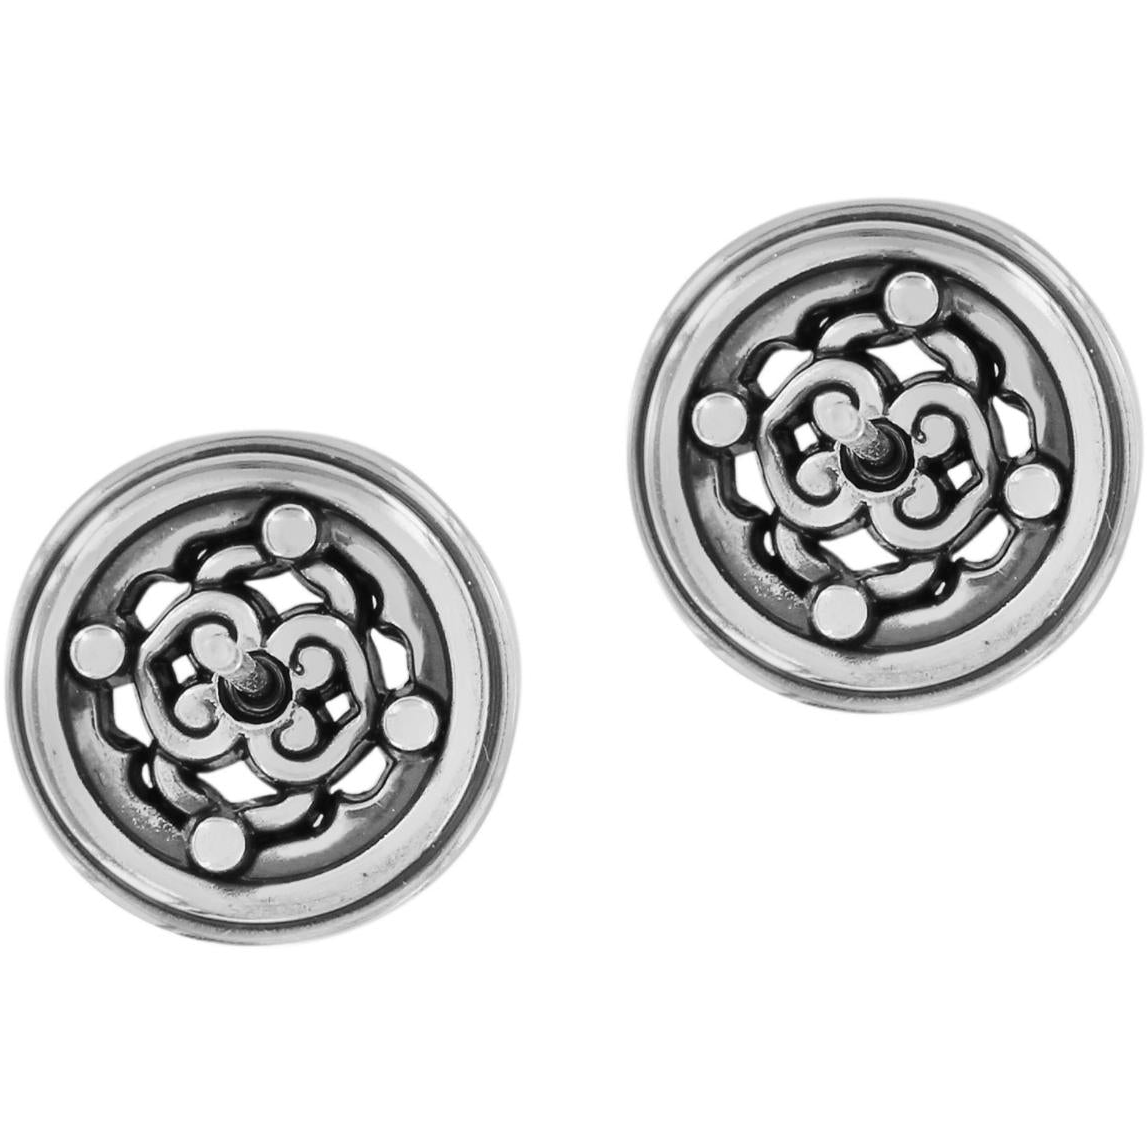 Intrigue Post Earrings - Zinnias Gift Boutique